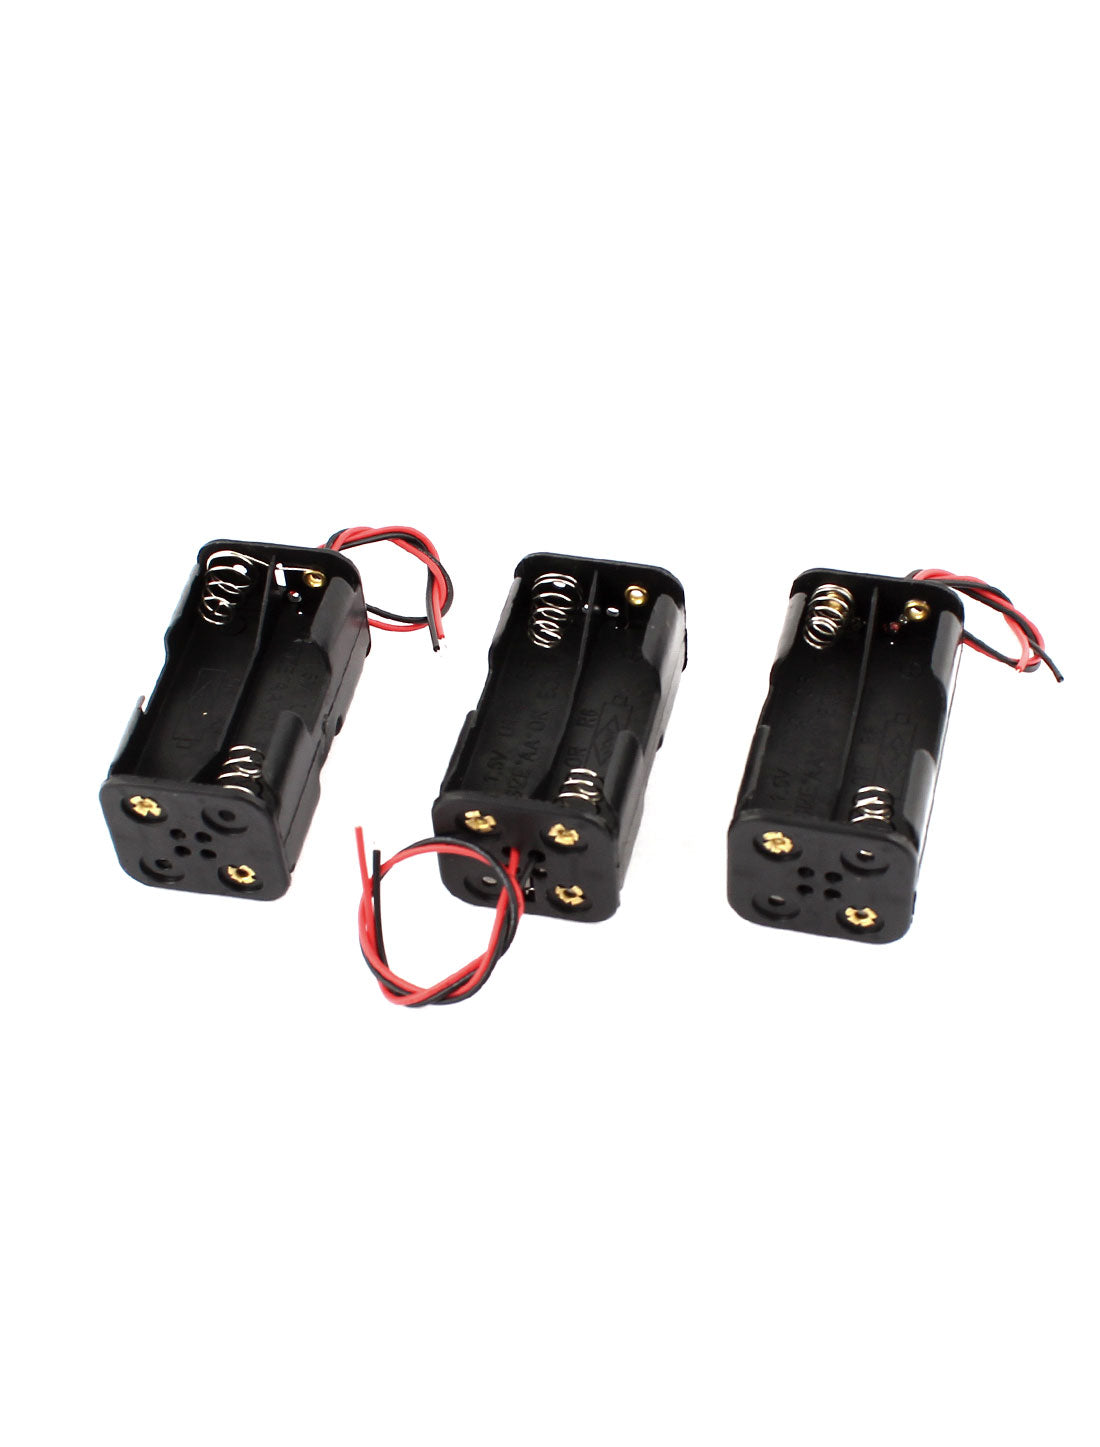 uxcell Uxcell 3 Pcs Black 4 x 1.5V AA Battery Batteries Holder Storage Case w Leads Wire